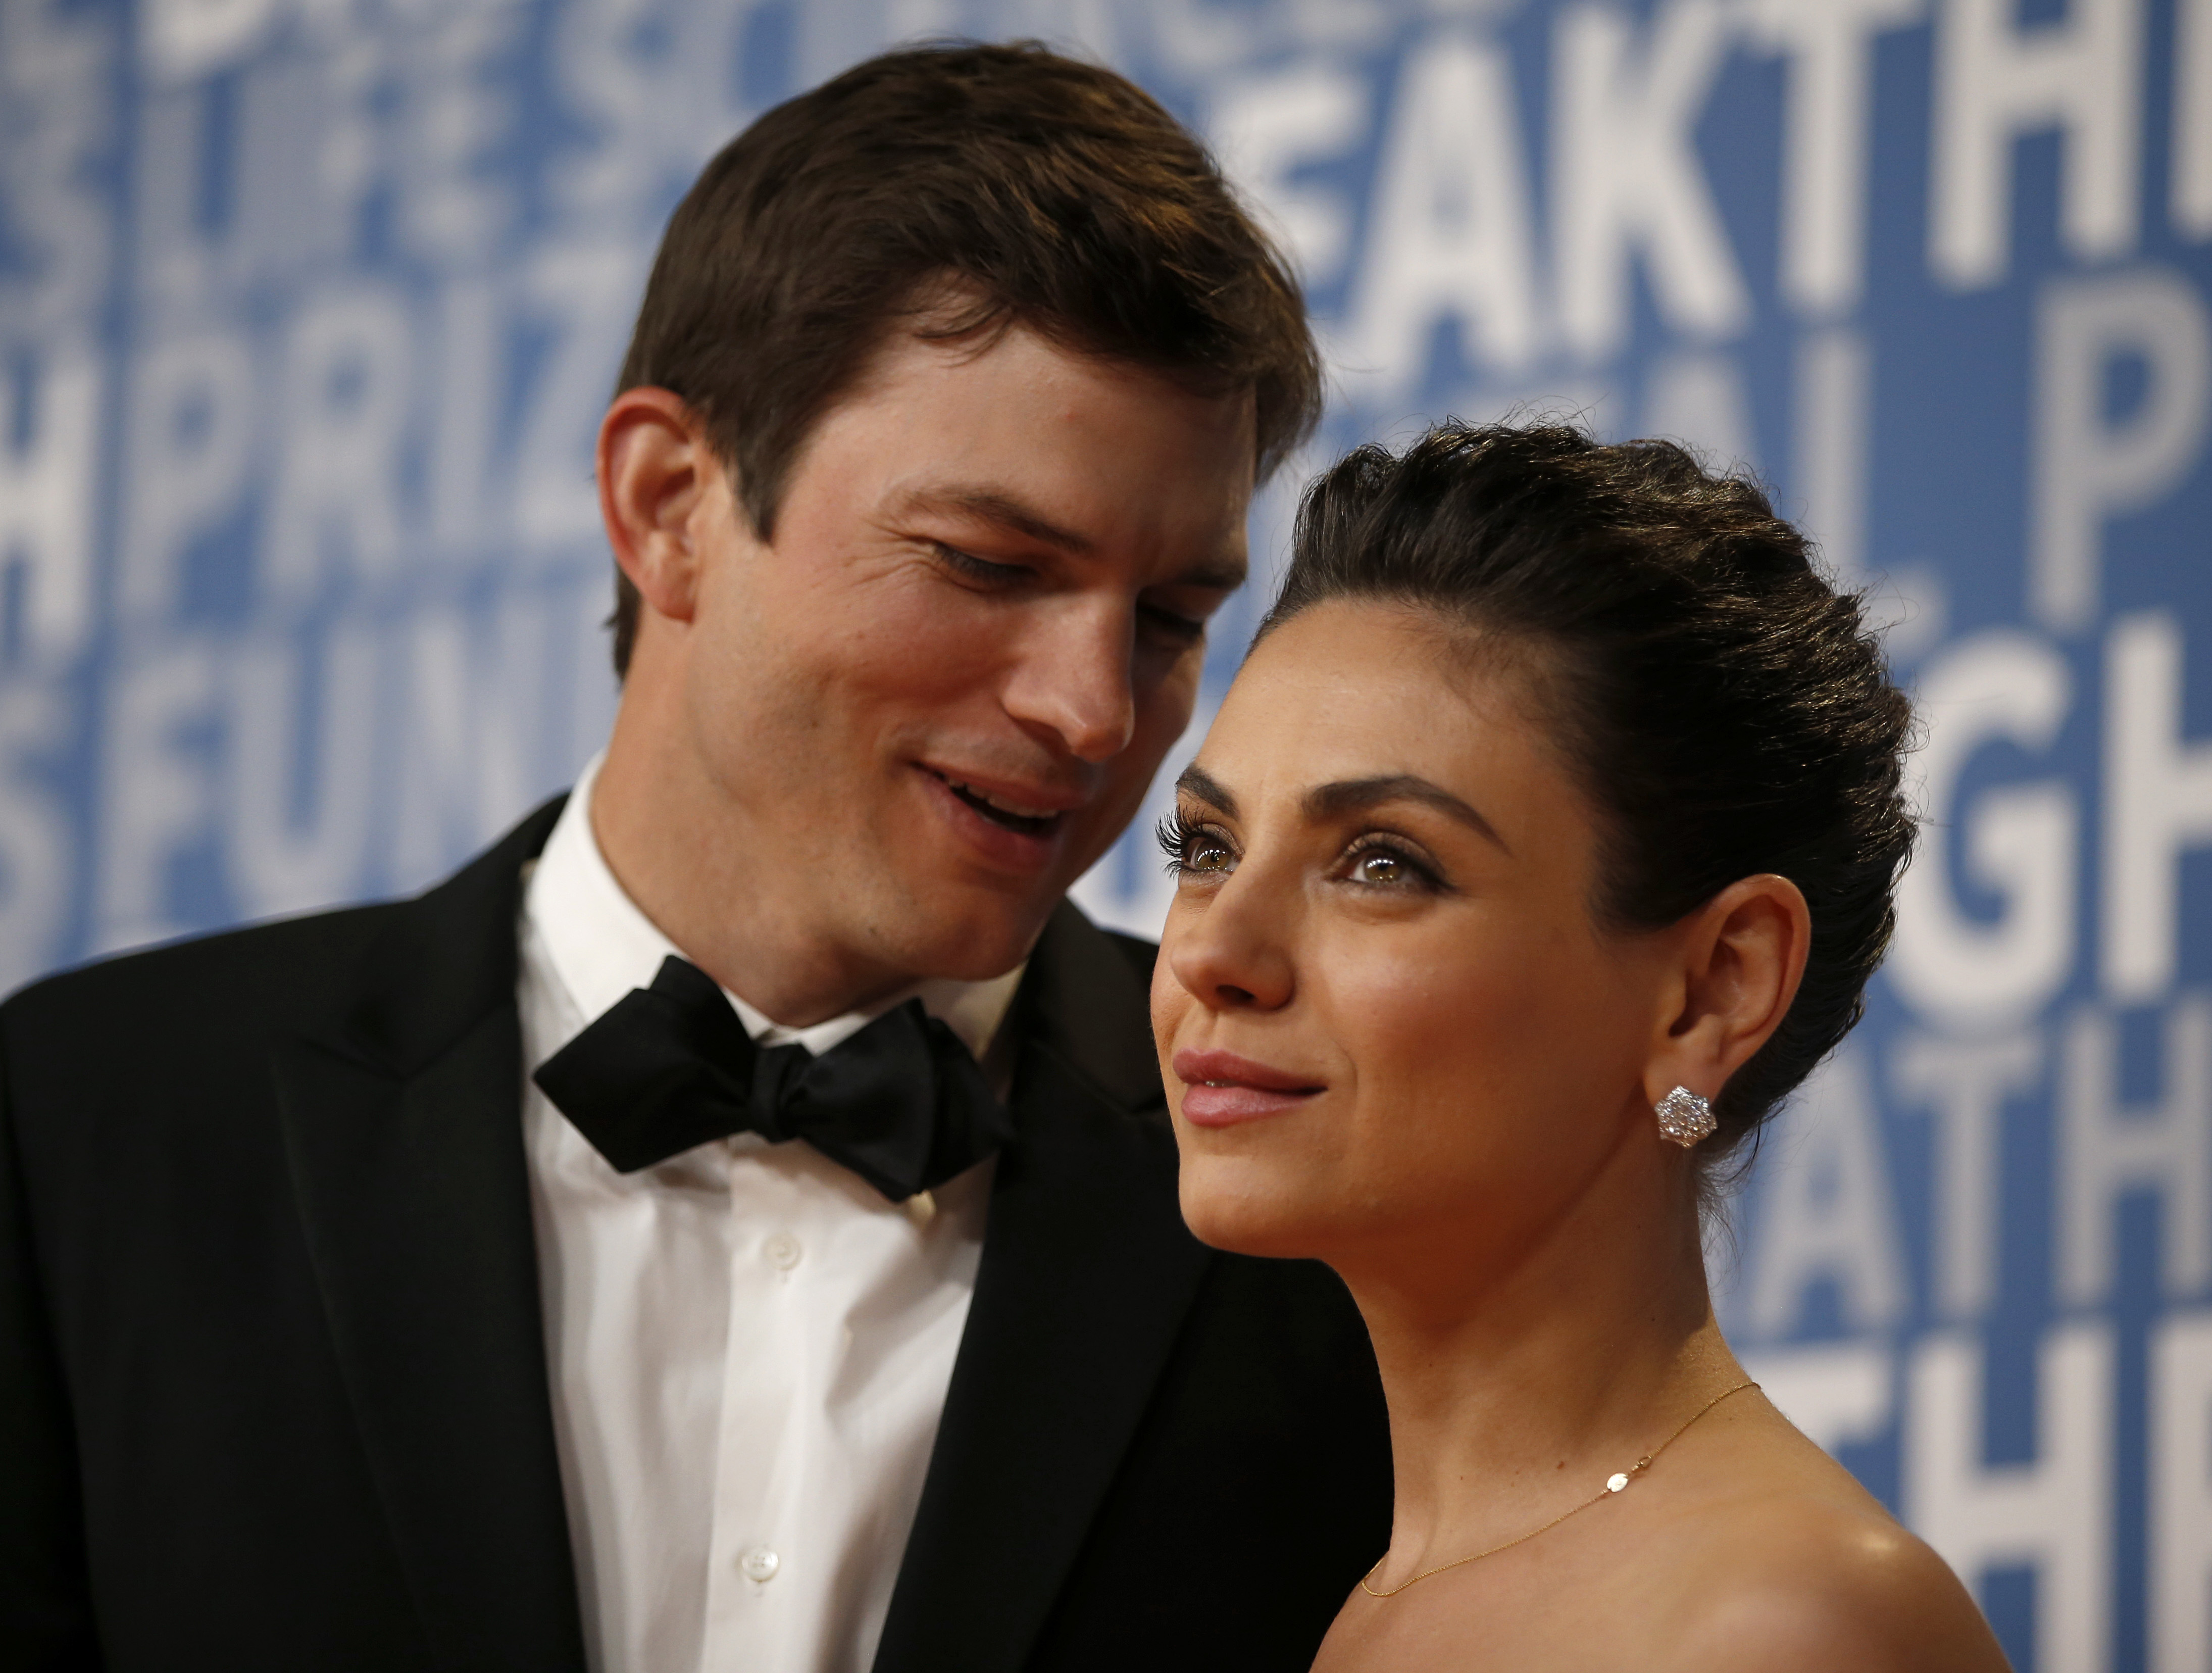 Ashton Kutcher and Mila Kunis on the red carpet for the 6th annual 2018 Breakthrough Prizes at Moffett Federal Airfield, Hangar One in Mountain View on December 3, 2017 in California. | Source: Getty Images